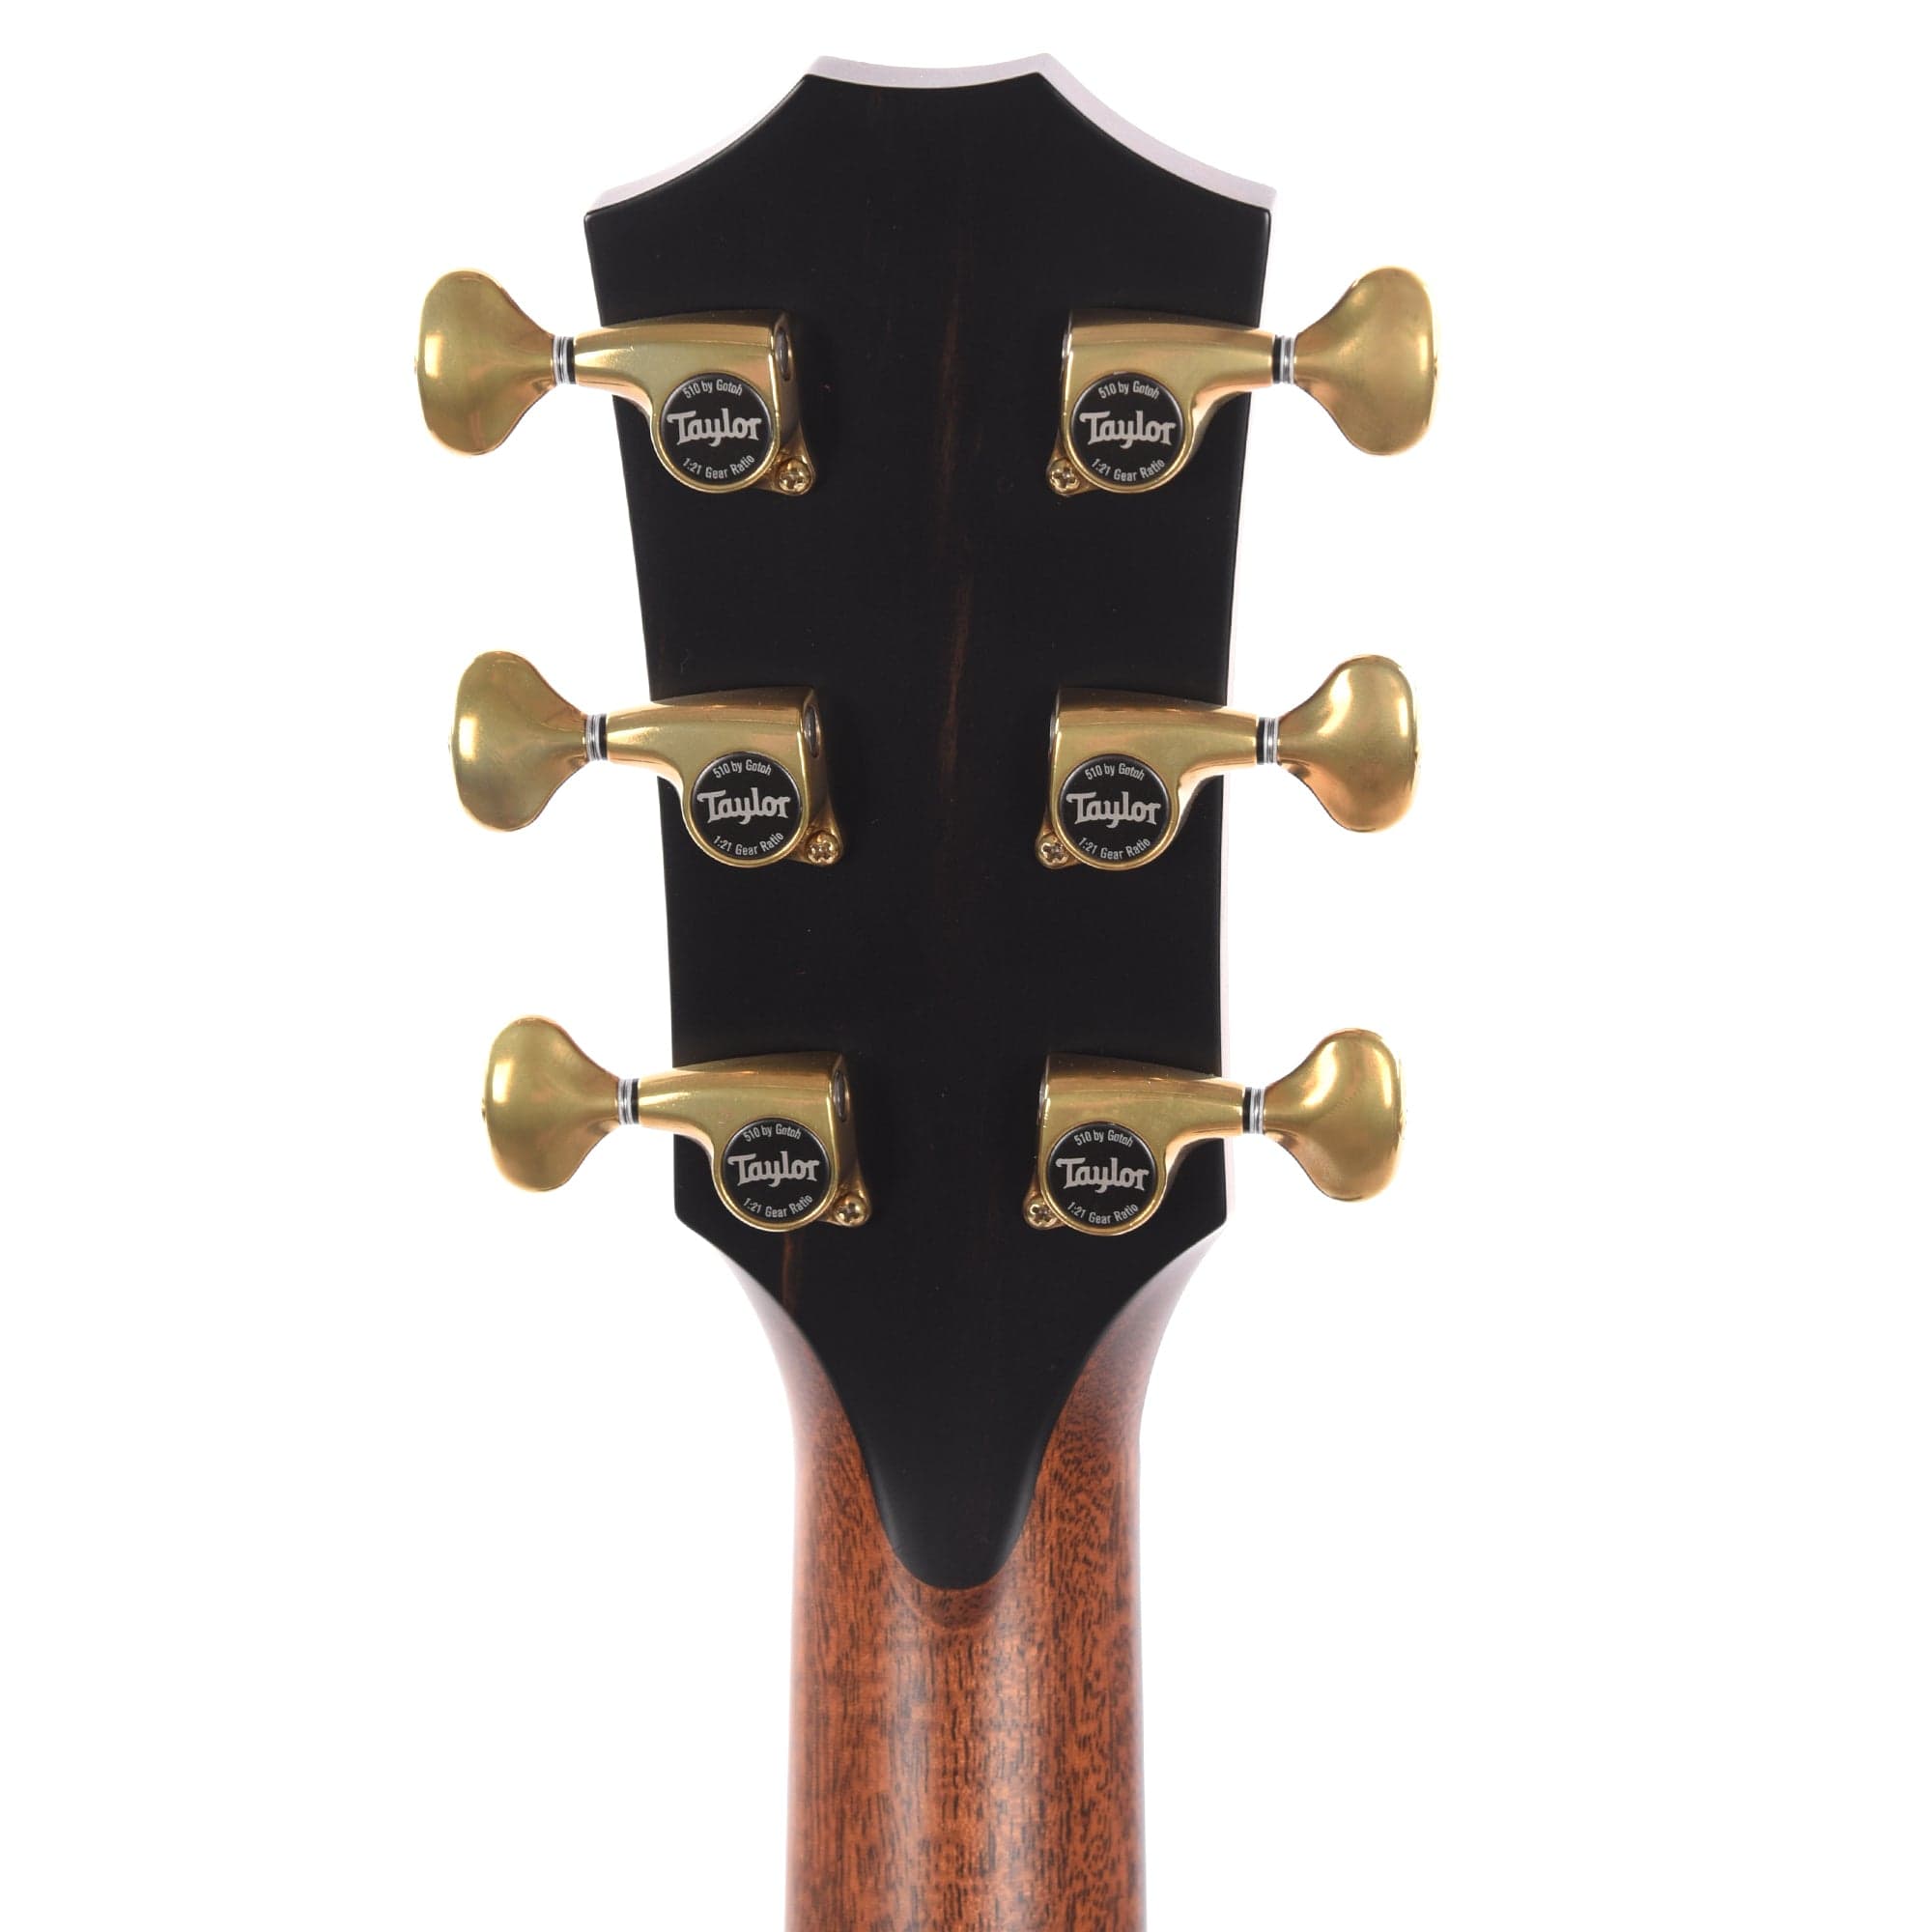 Taylor Builder's Edition 912ce Grand Concert Lutz Spruce/Rosewood Natural ES2 Acoustic Guitars / OM and Auditorium